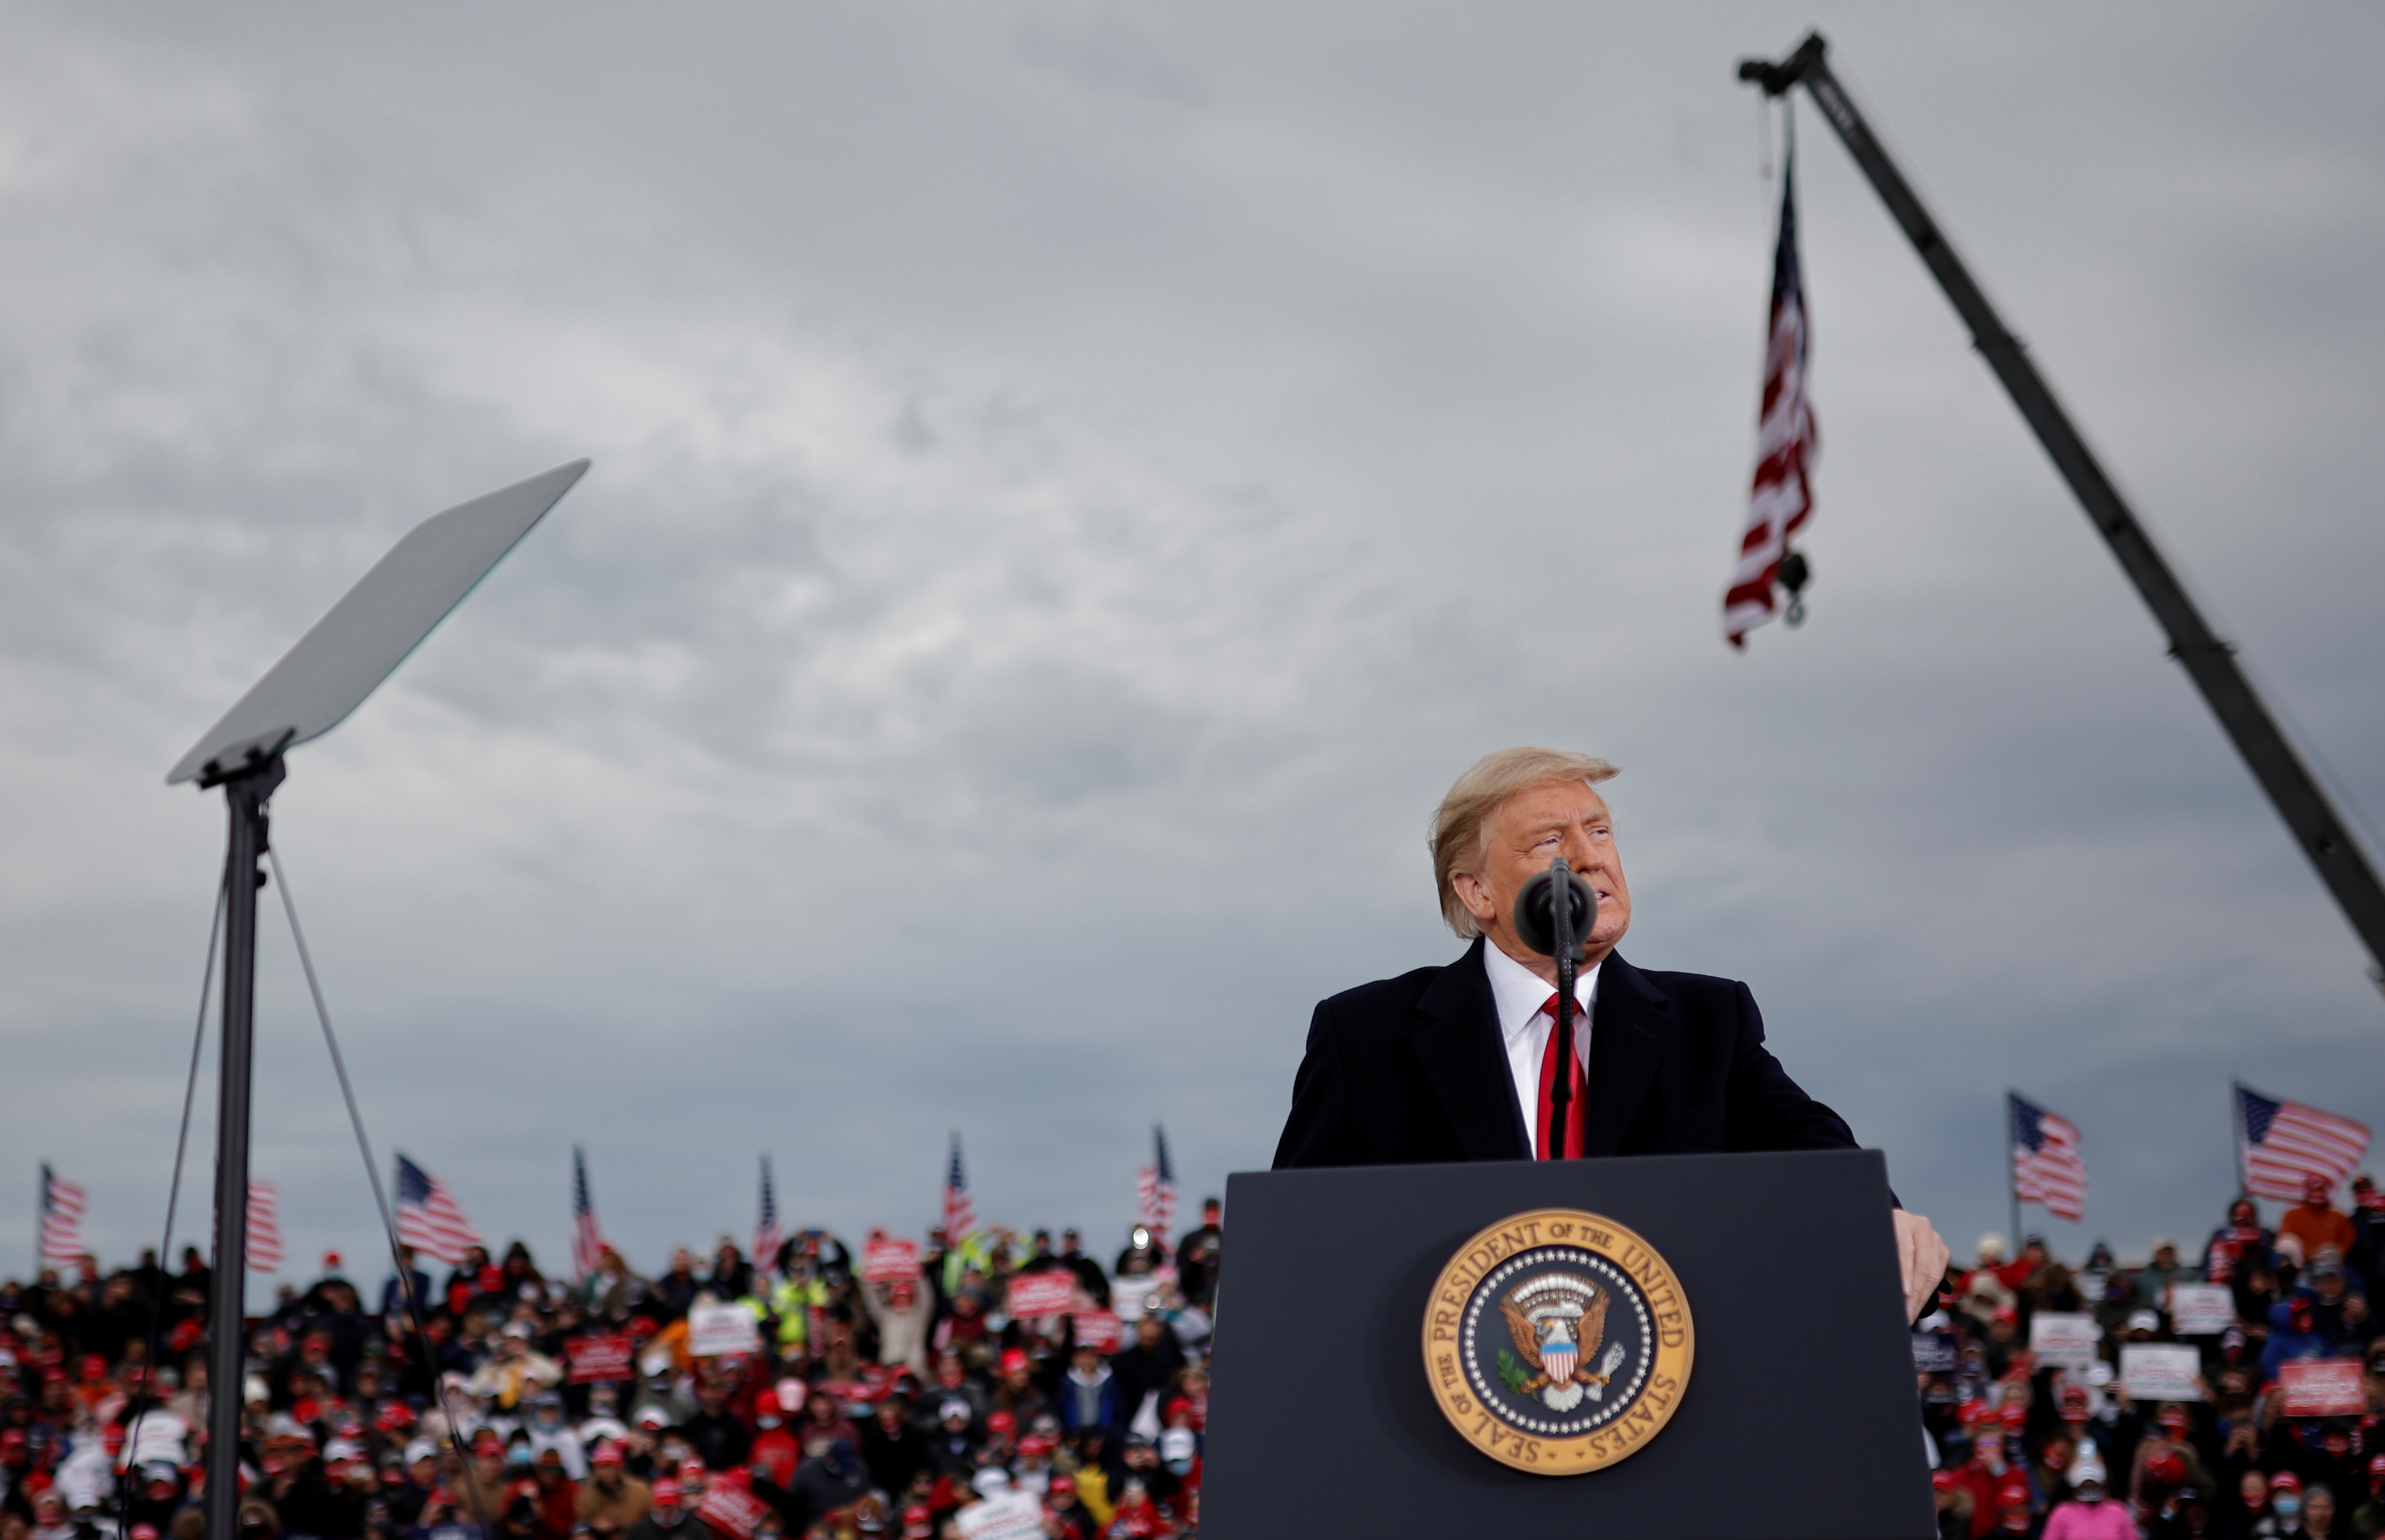 U.S. President Donald Trump speaks during a campaign rally at Muskegon County Airport in Muskegon, Michigan U.S., October 17, 2020. REUTERS/Carlos Barria